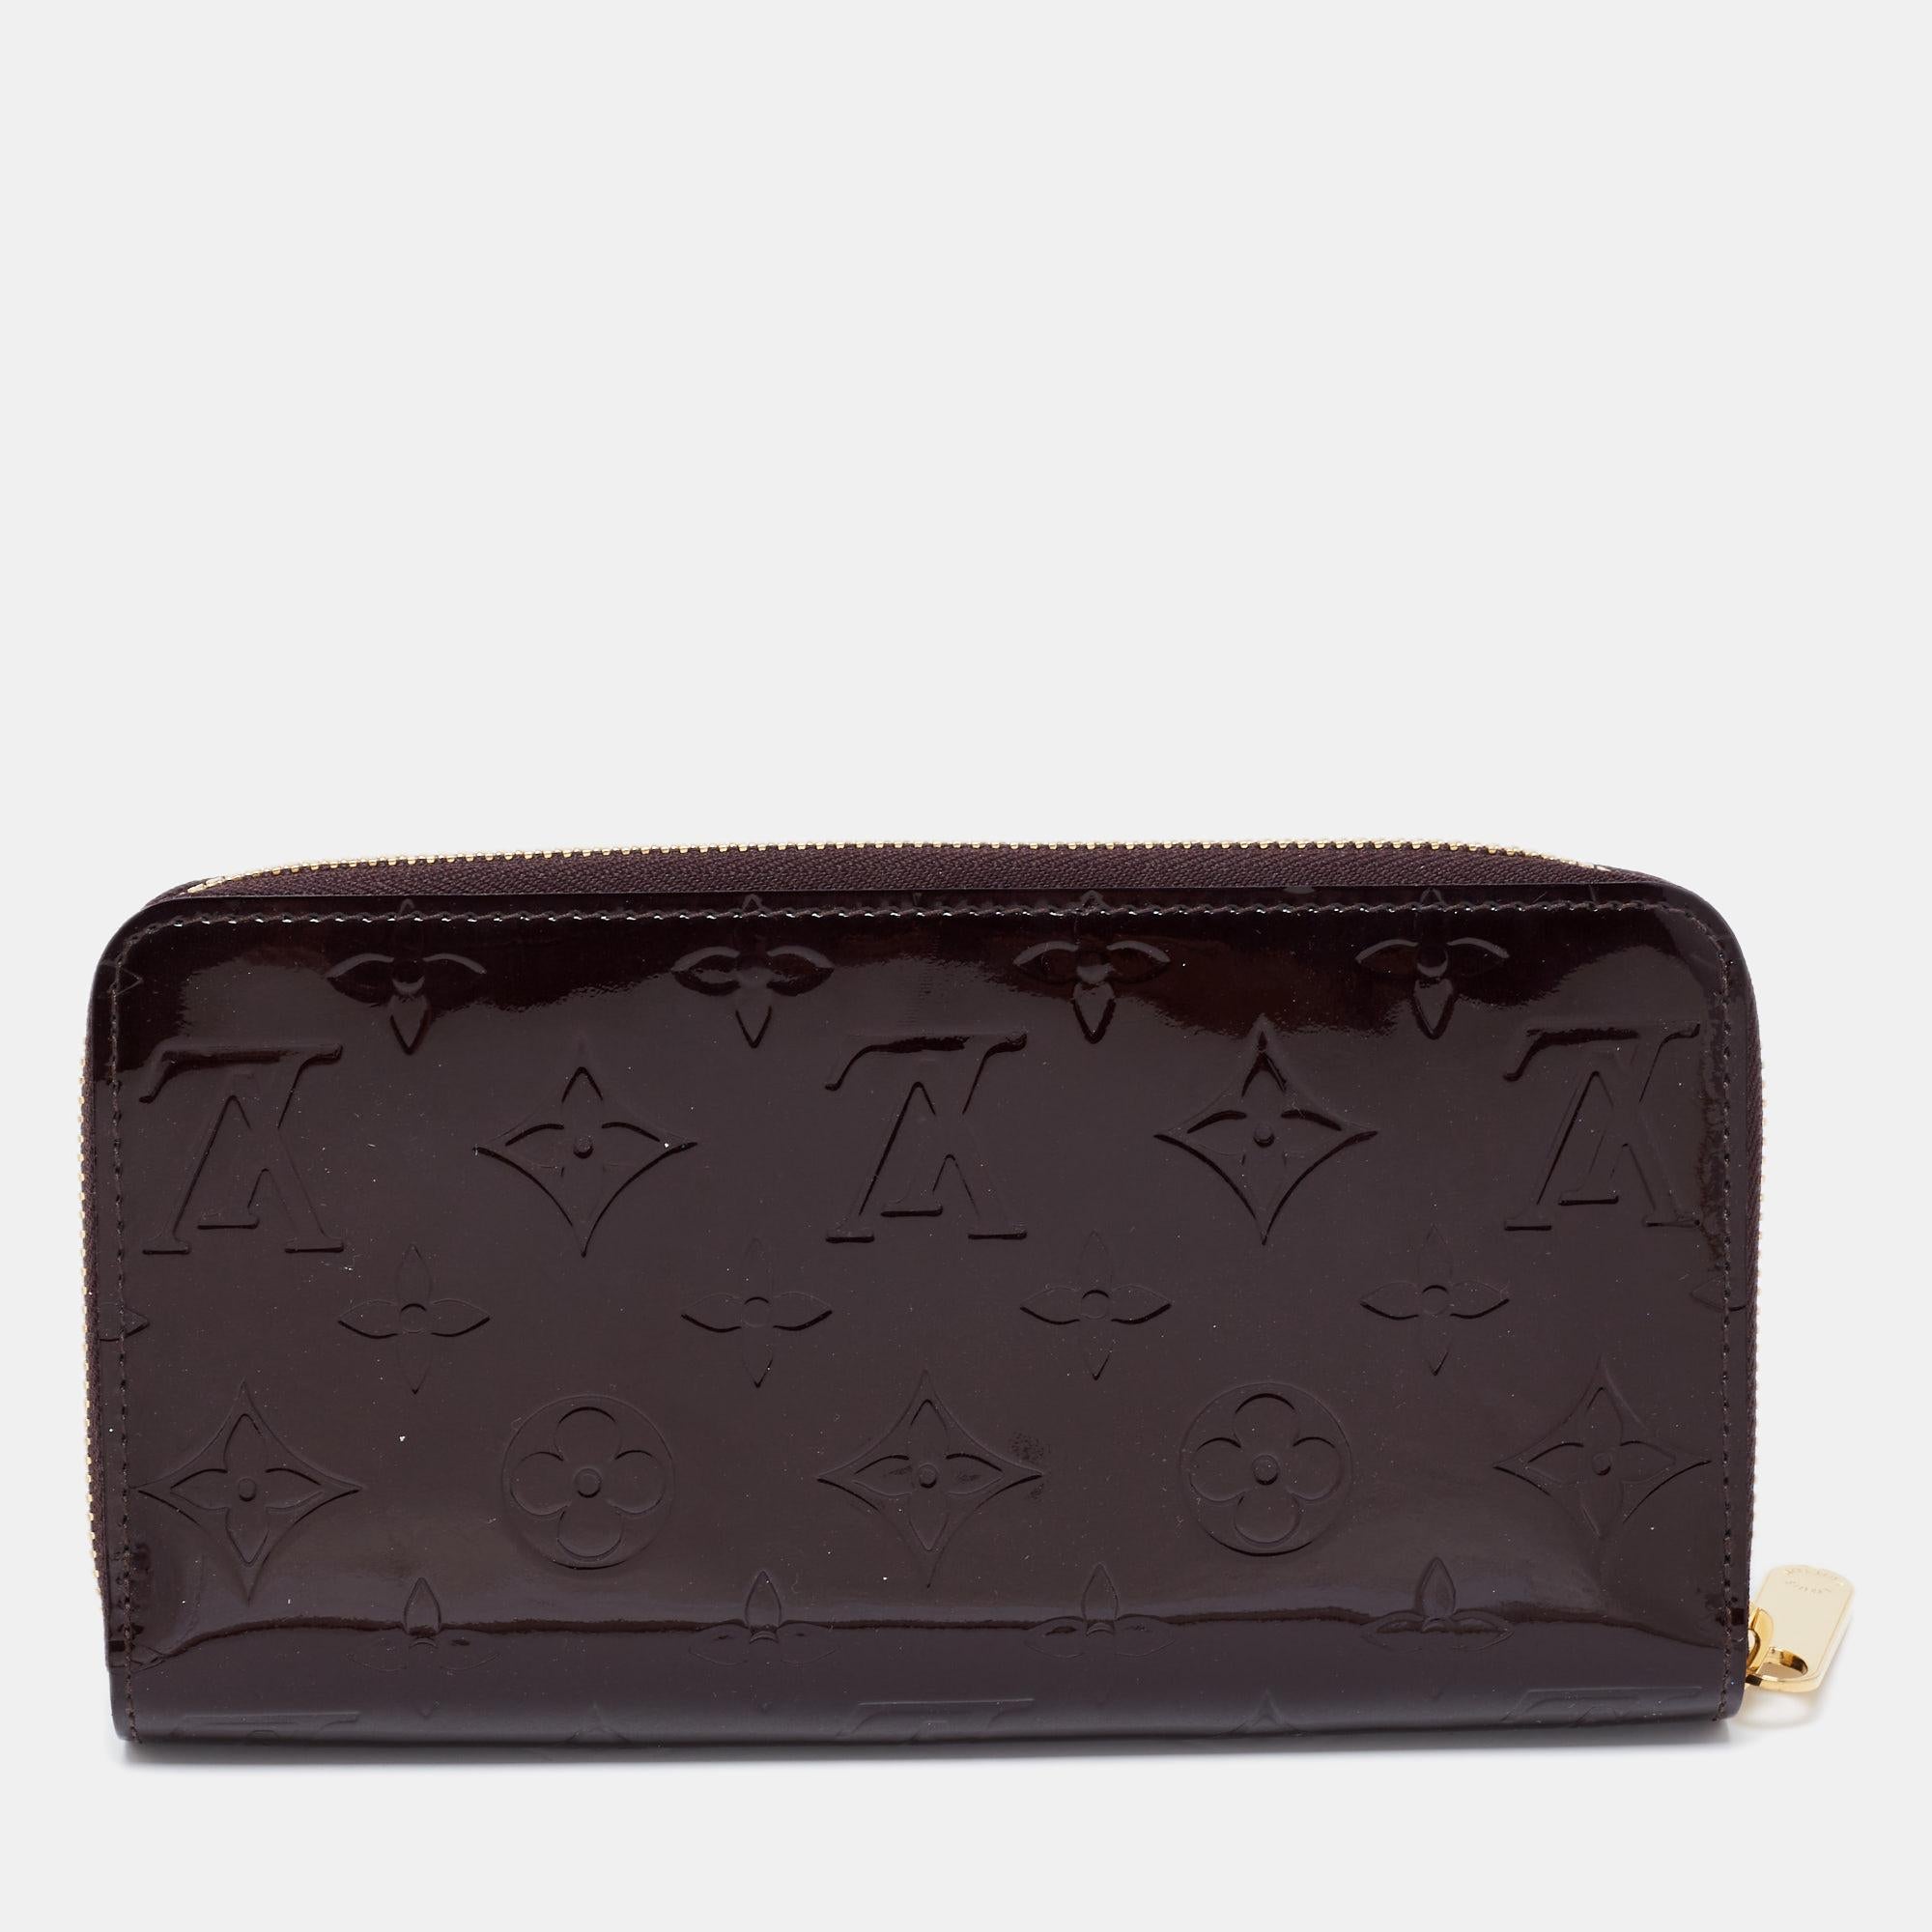 This Louis Vuitton Zippy wallet is designed for everyday use. Crafted from Monogram Vernis, the wallet has a wide zip closure that opens to reveal multiple slots, compartments, and a zip pocket for you to neatly arrange your daily necessities.

